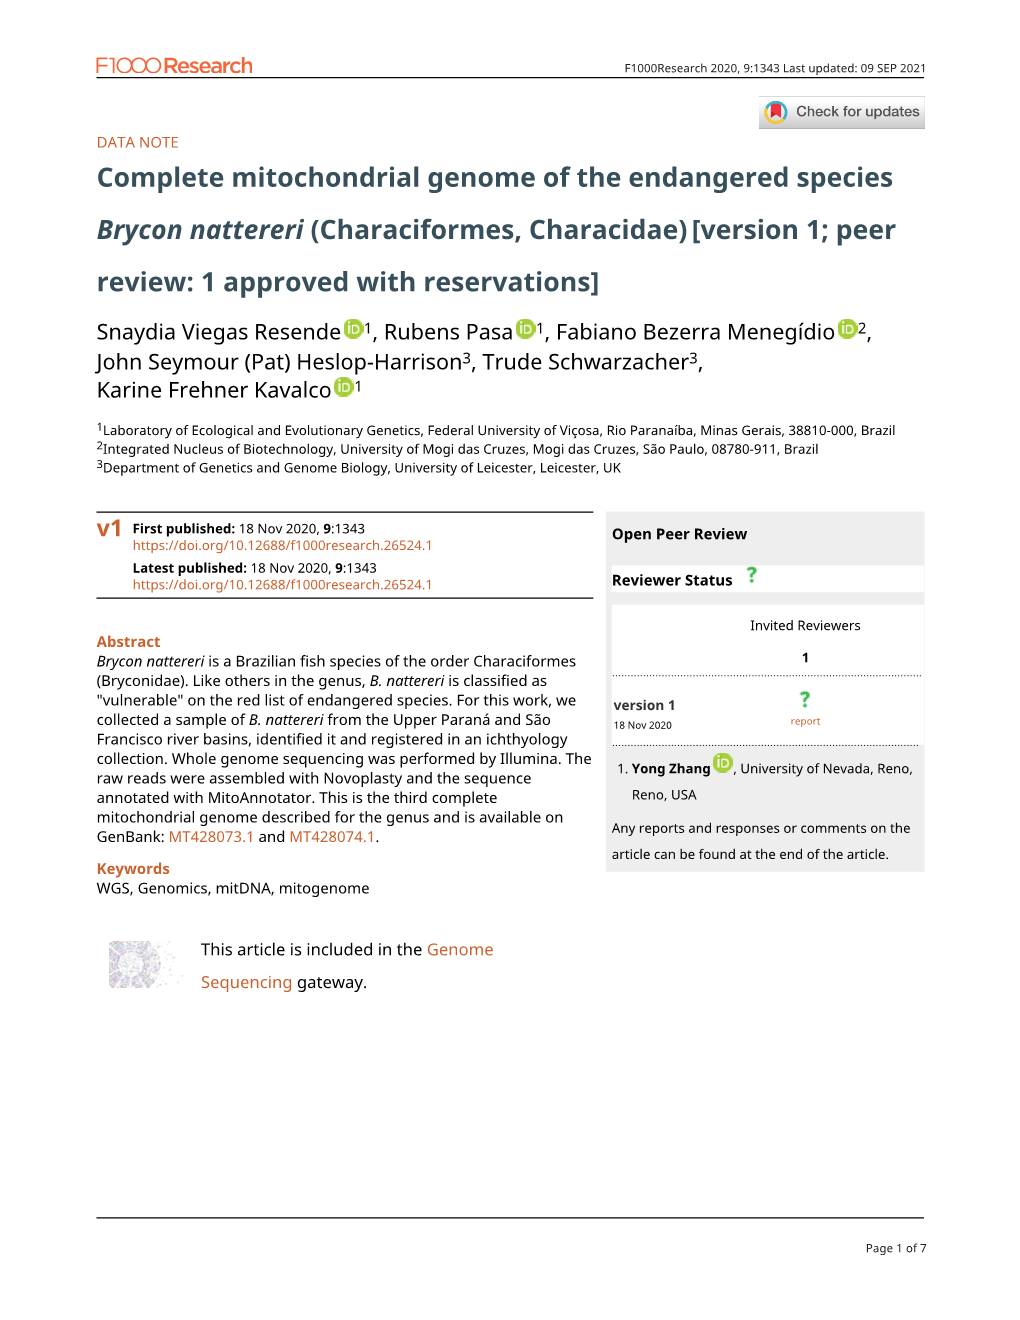 Complete Mitochondrial Genome of the Endangered Species Brycon